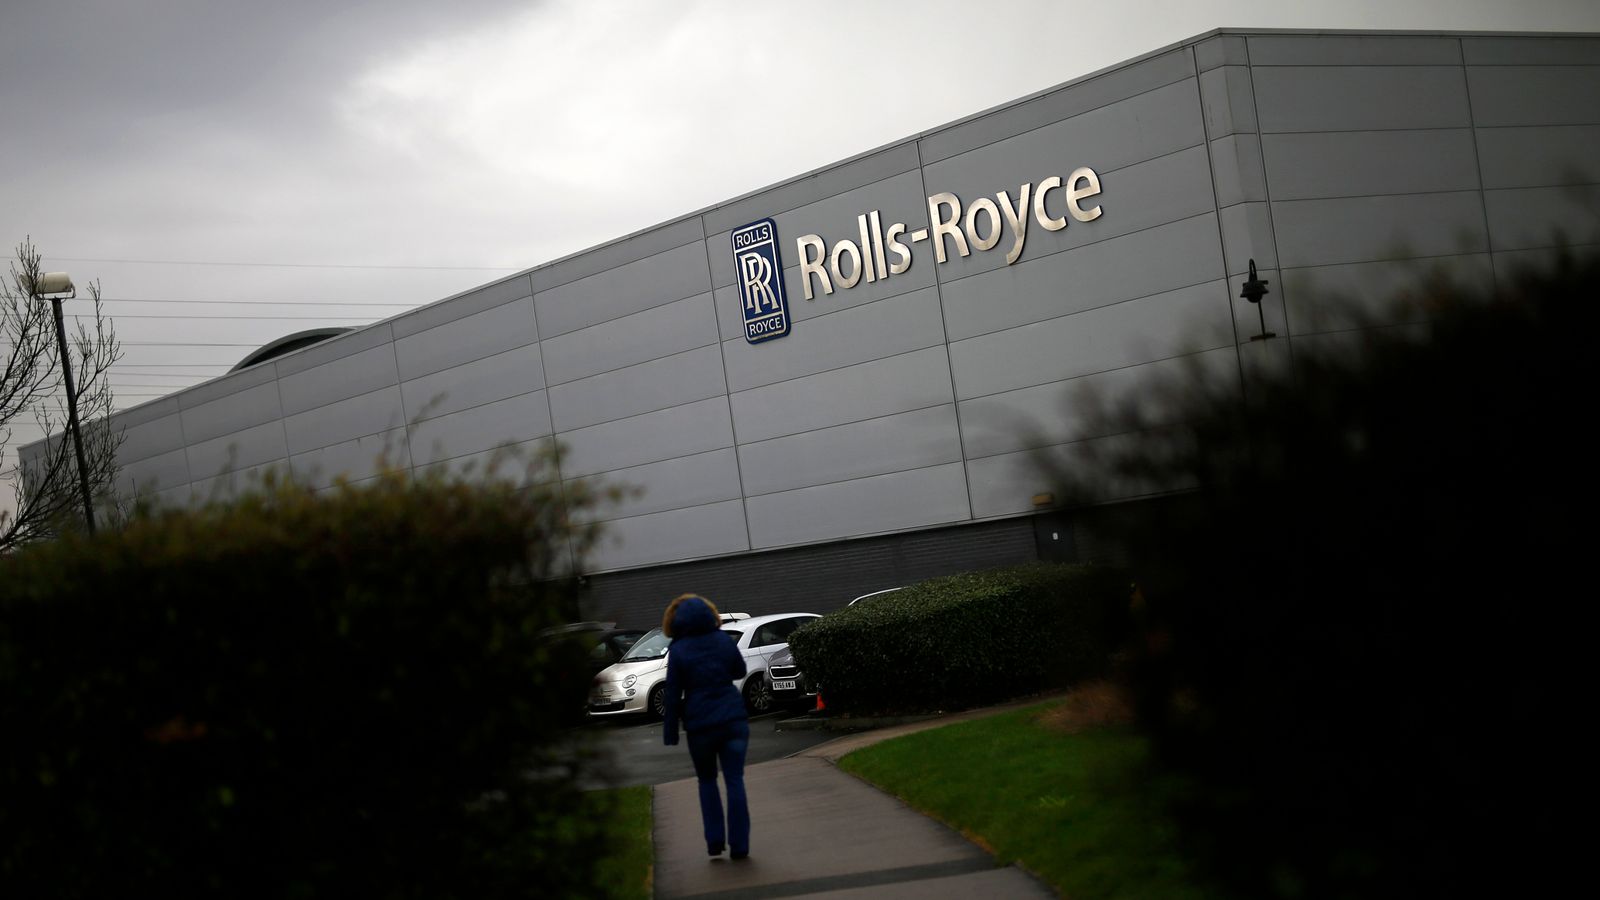 Rolls-Royce hands workers £2,000 to ease cost of living squeeze